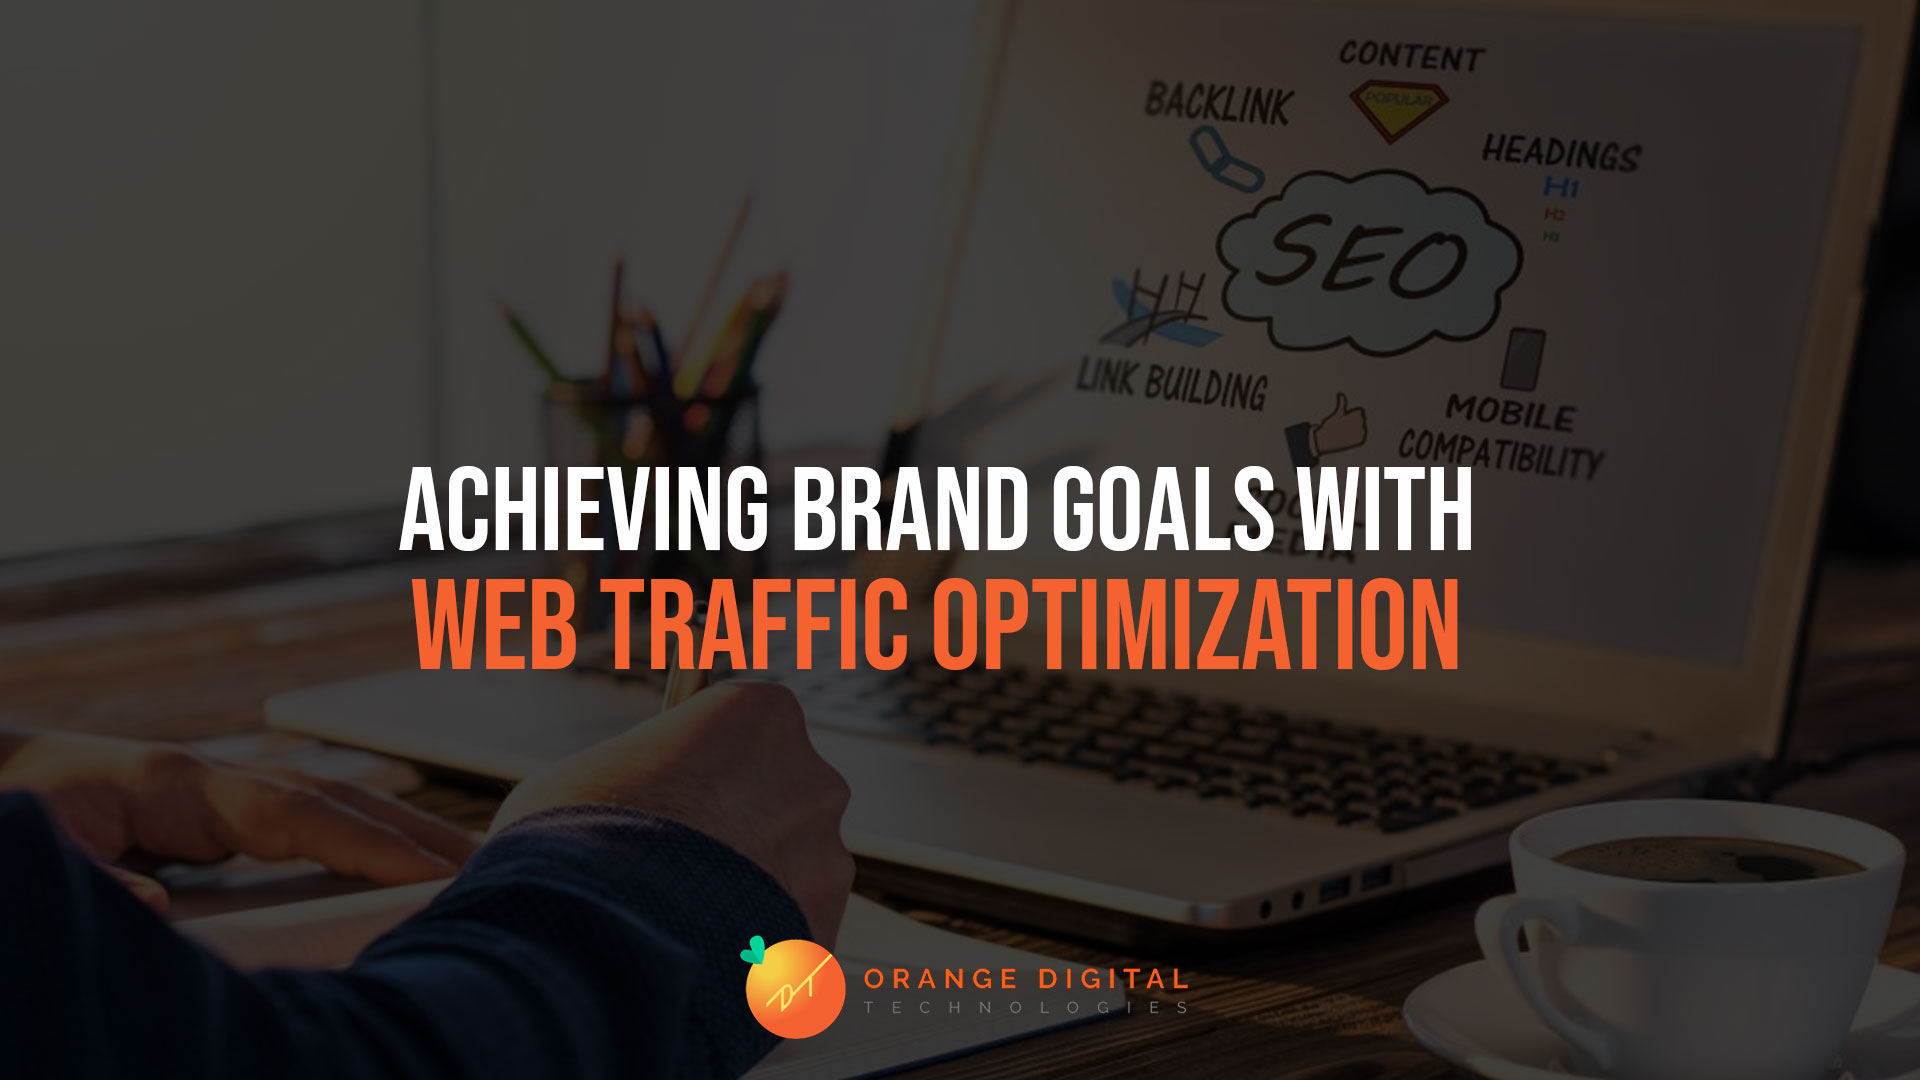 Achieving Brand Goals with Web Traffic Optimization